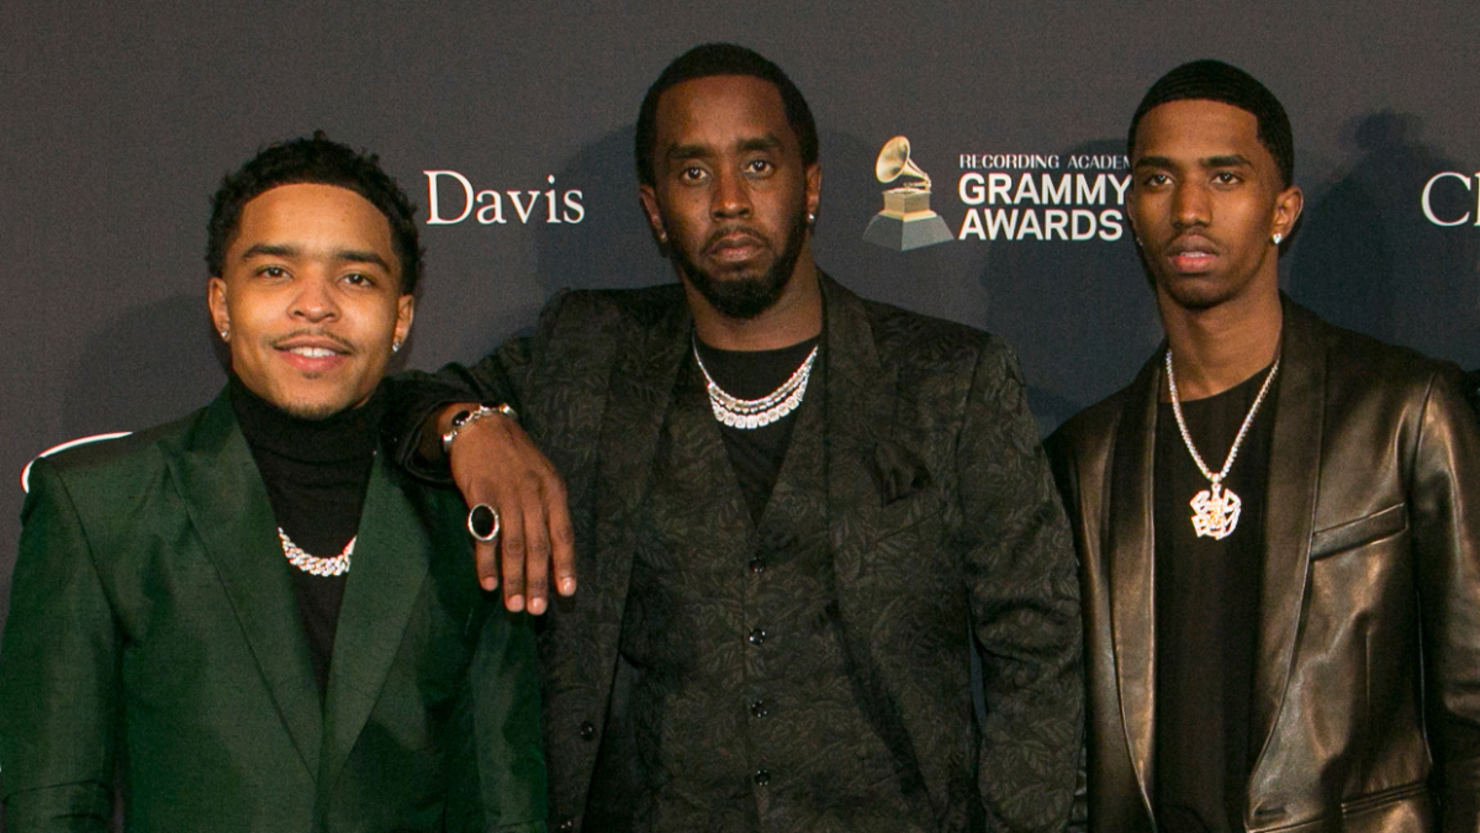 Justin Combs, Diddy & King Combs